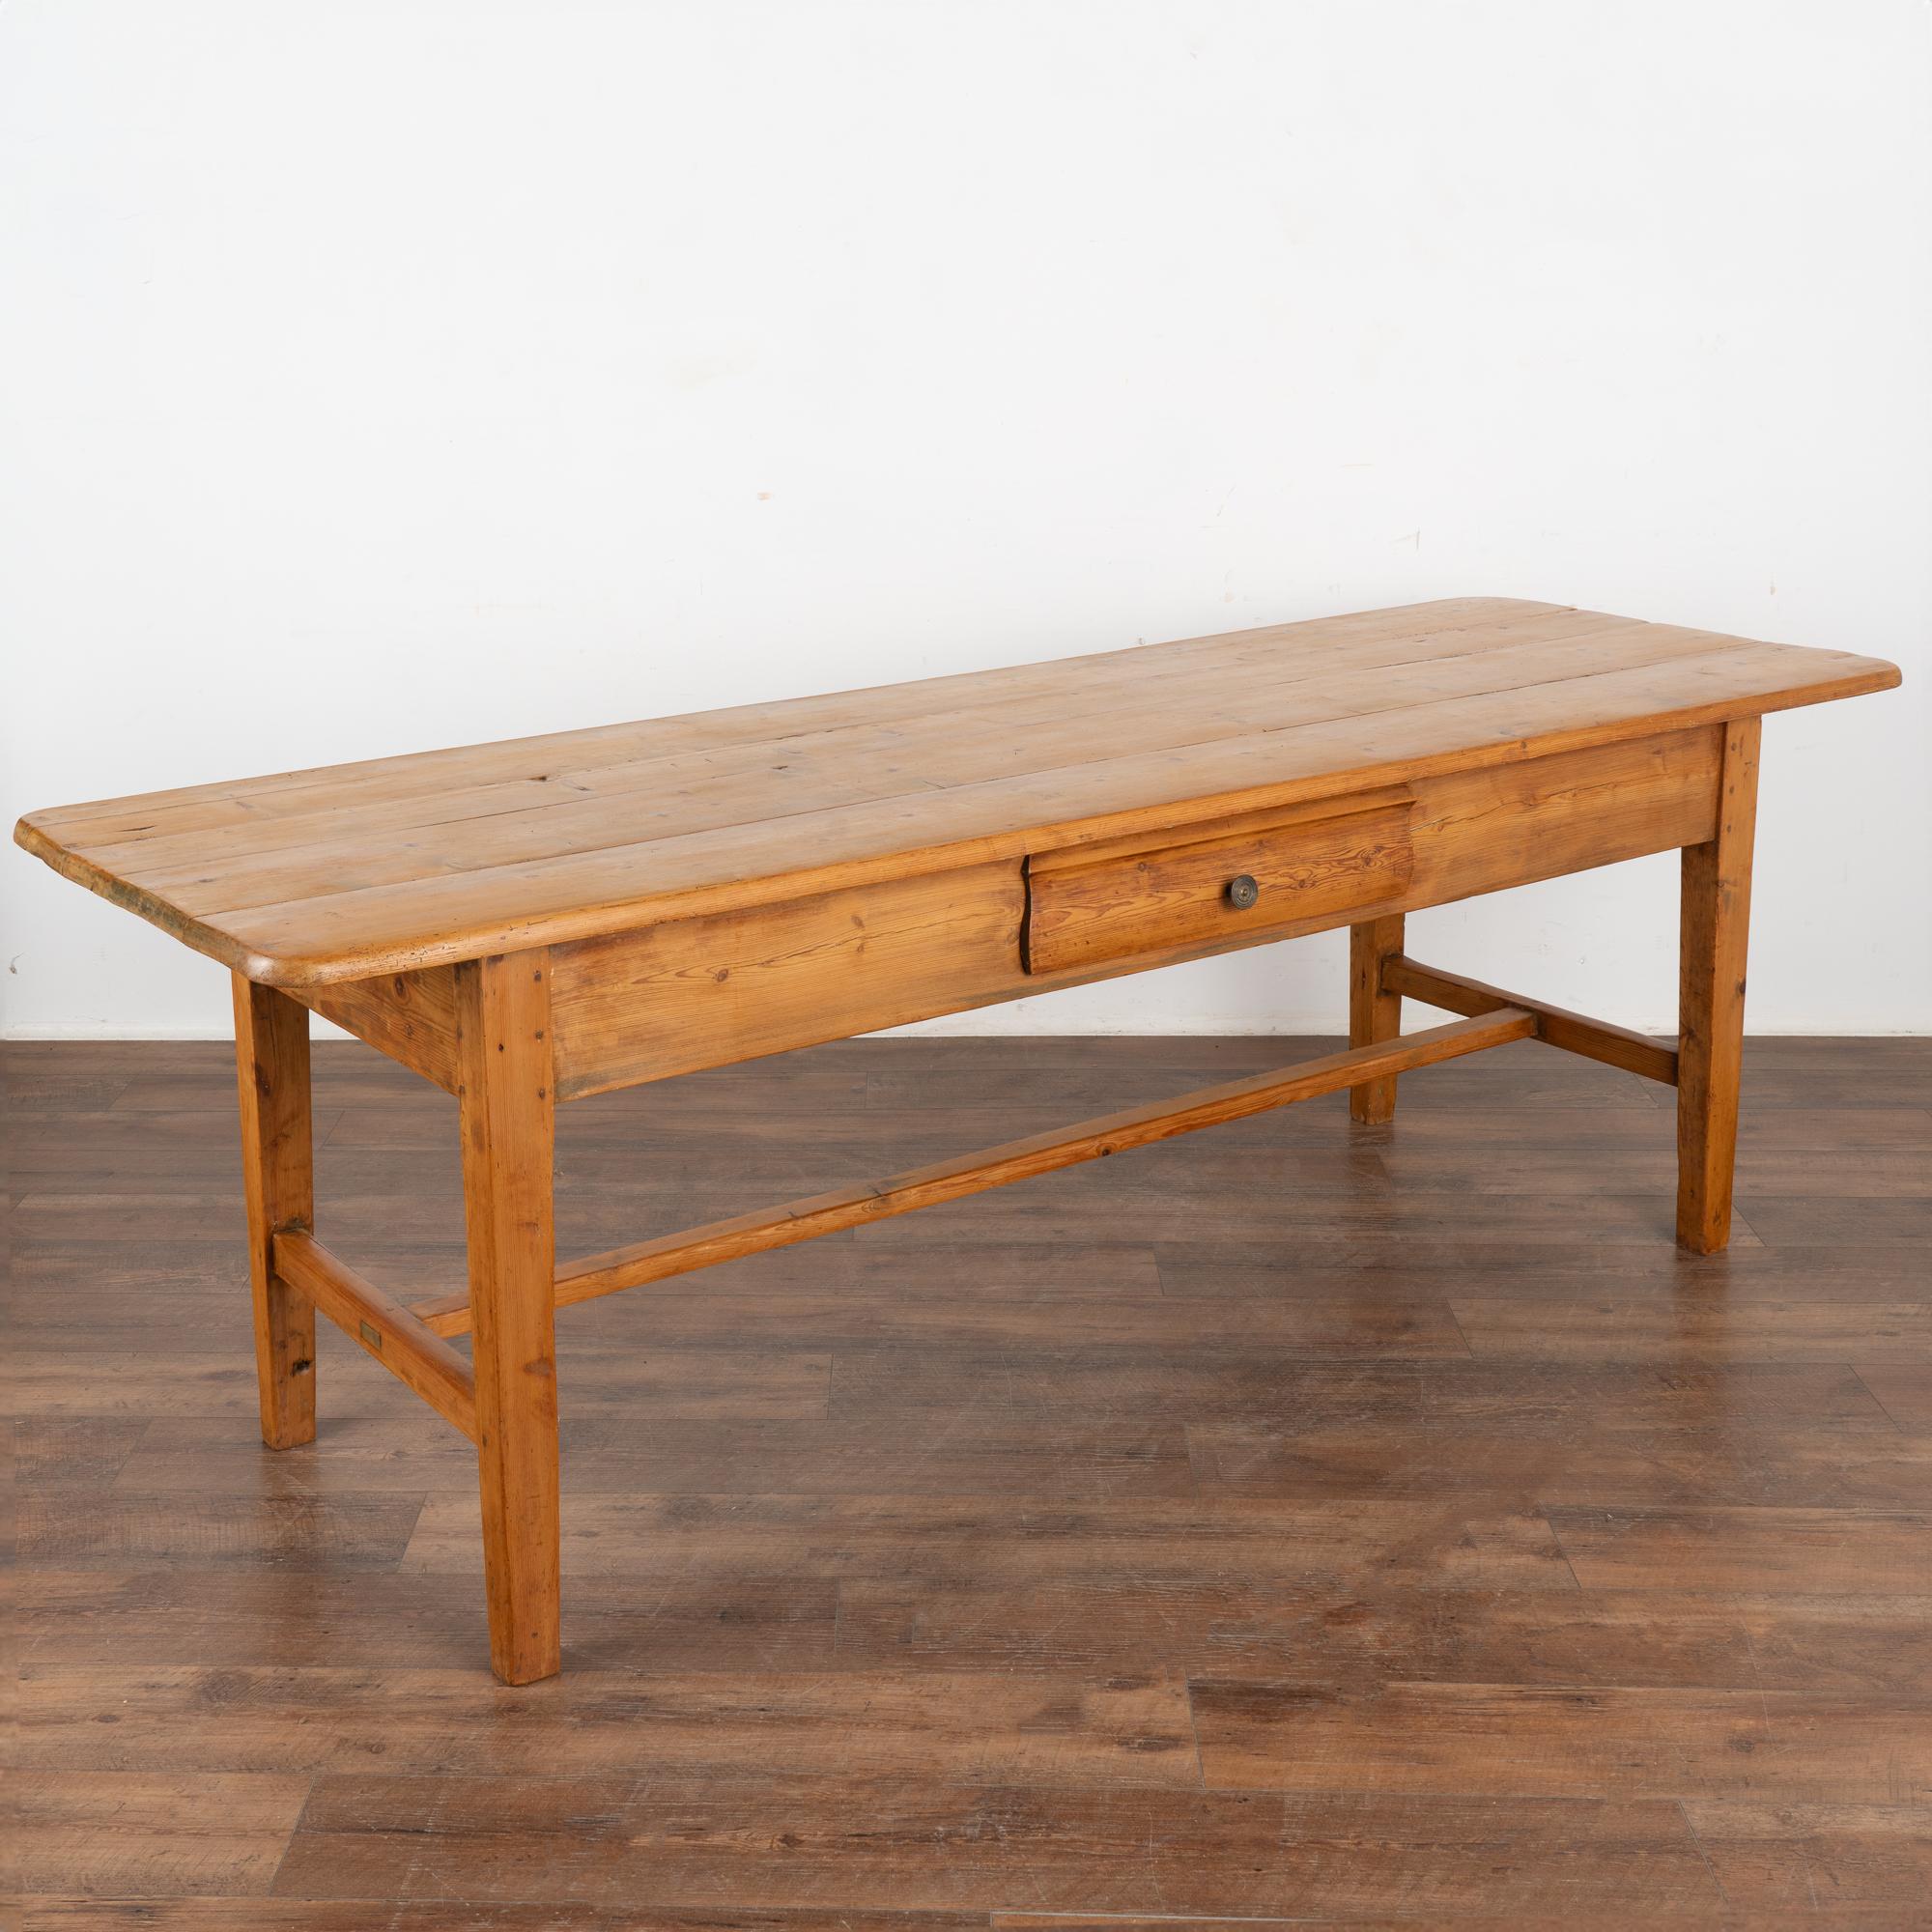 The beauty of this pine farm table comes from the warm aged pine and the clean tapered legs of the simple stretcher base.
It may have originally served as a kitchen work table in a country manor house; note the scratches, dings, stains and age